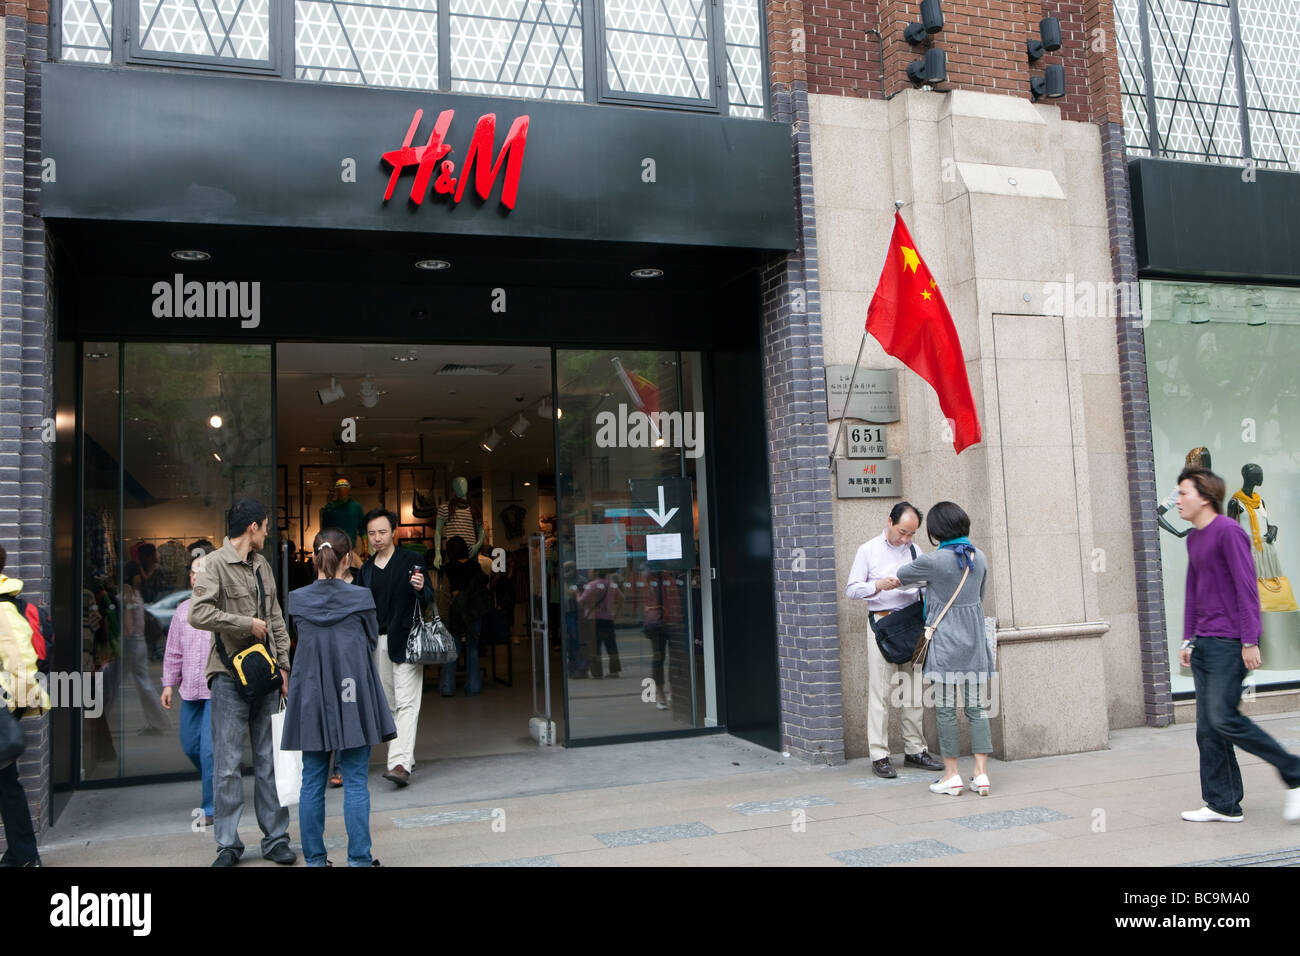 The exterior of a H&M clothing store in seen in Shanghai, China Stock Photo  - Alamy